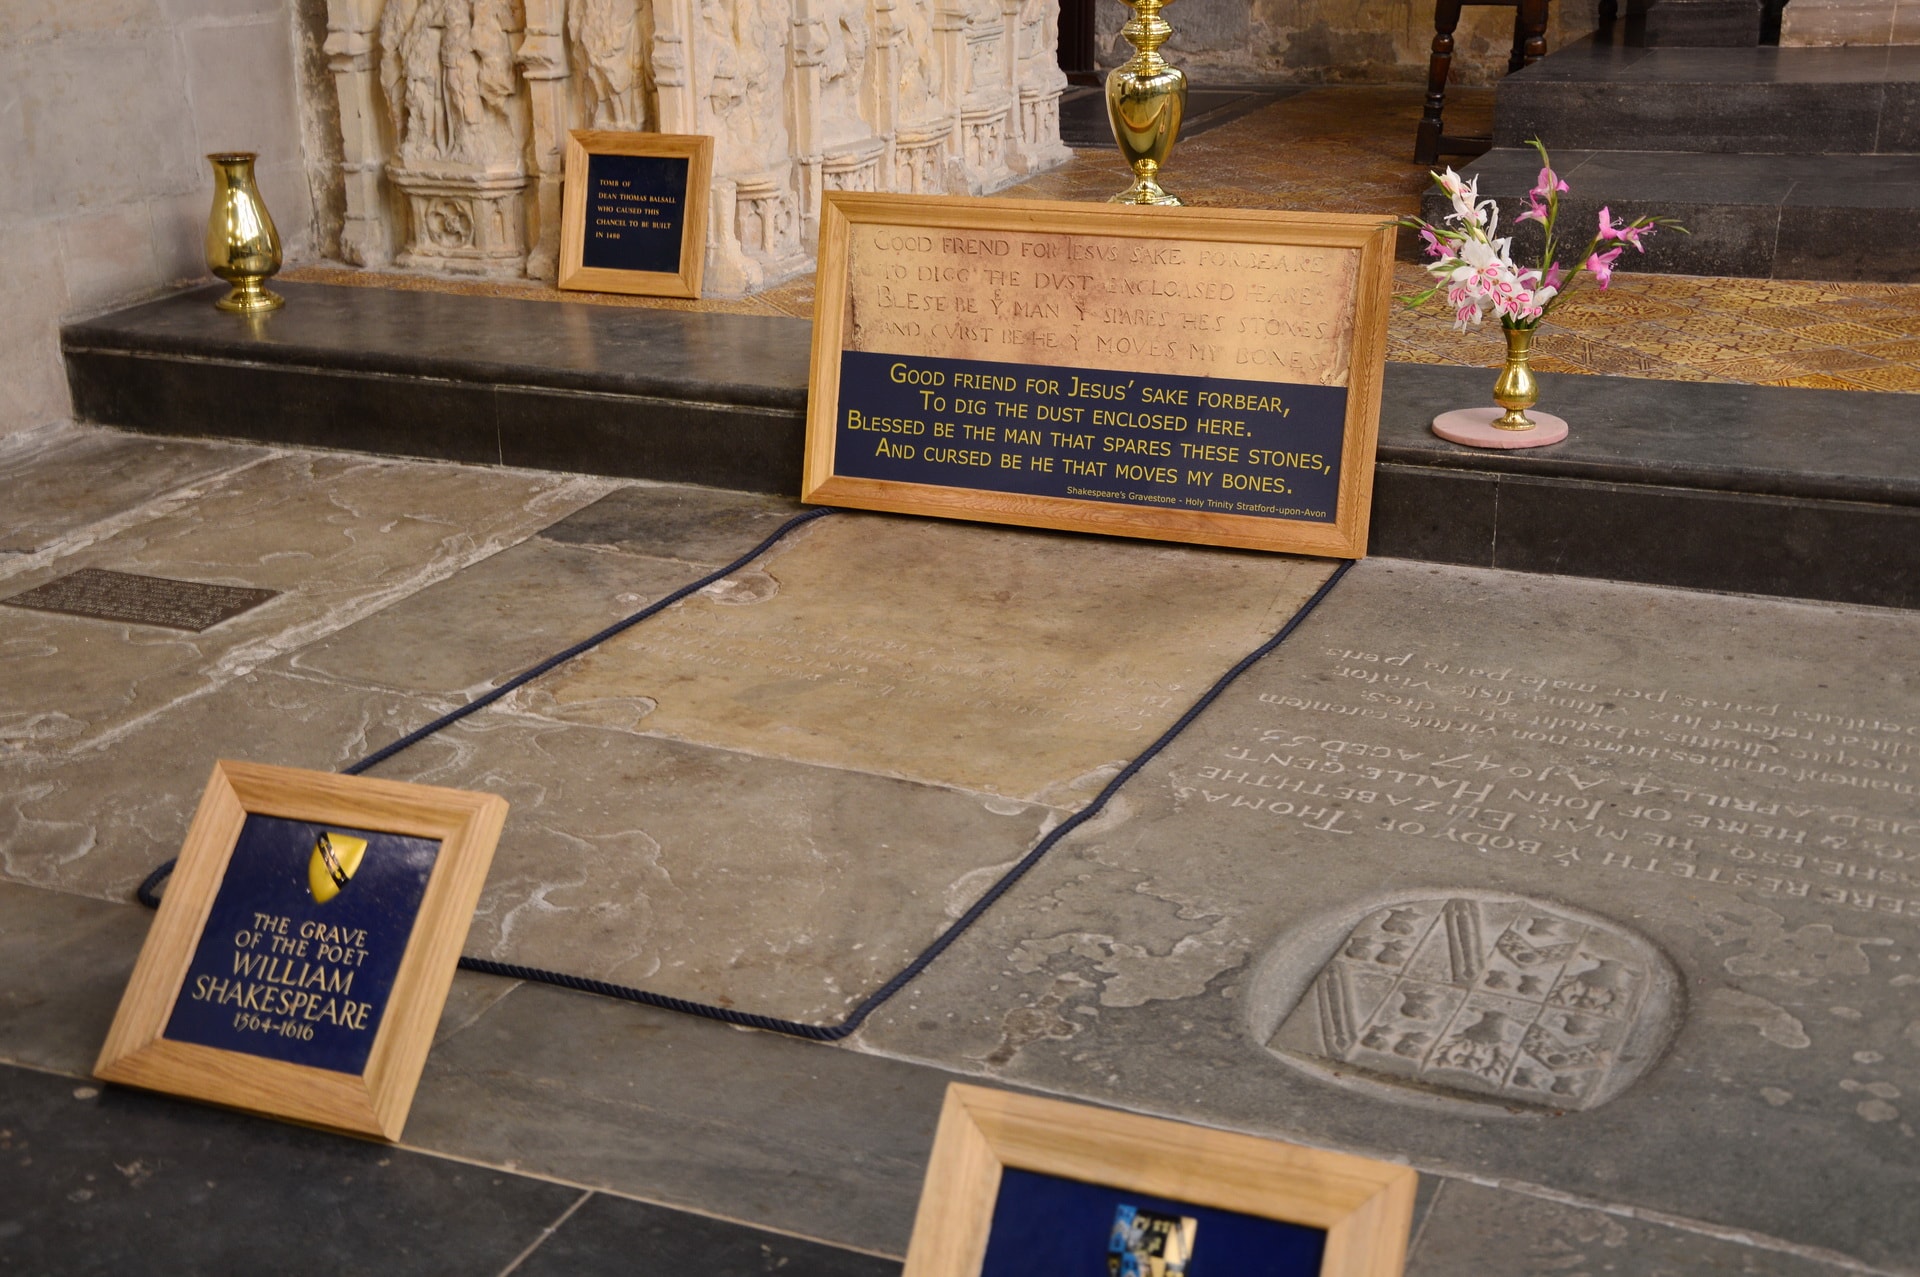 The grave of William Shakespeare in the Church of the Holy Trinity